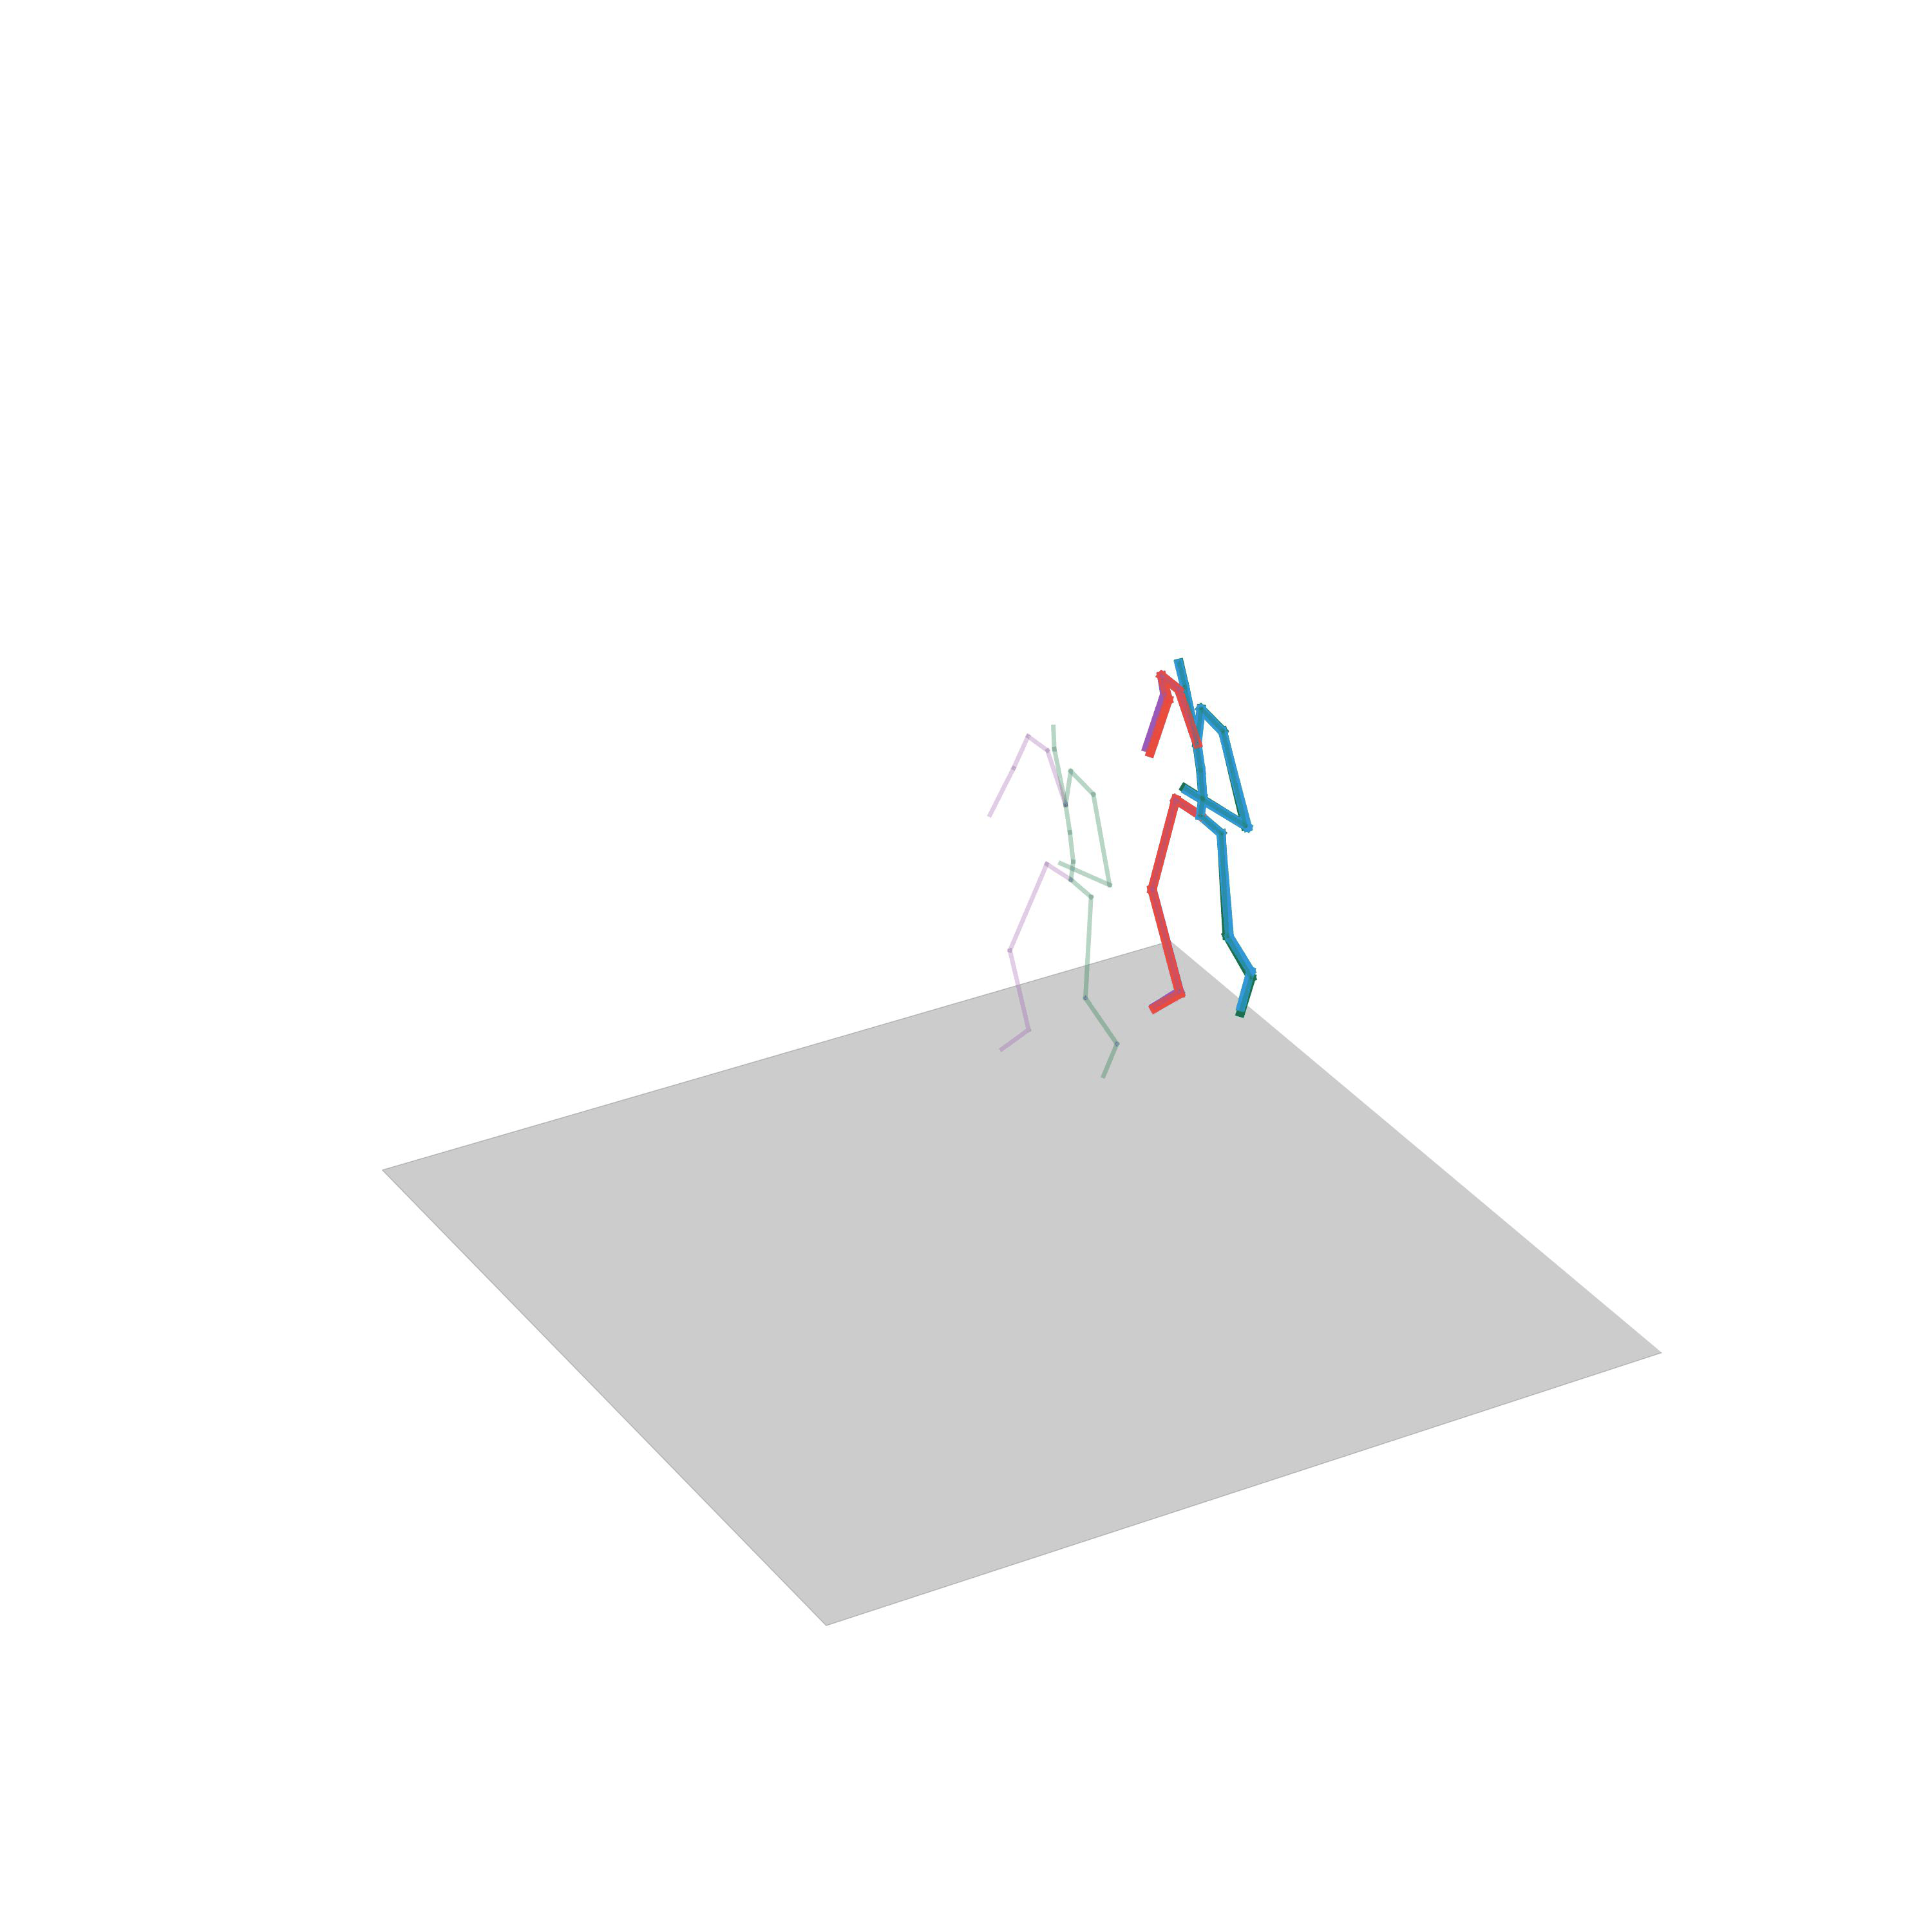 Running While Avoiding Obstacles.Gif